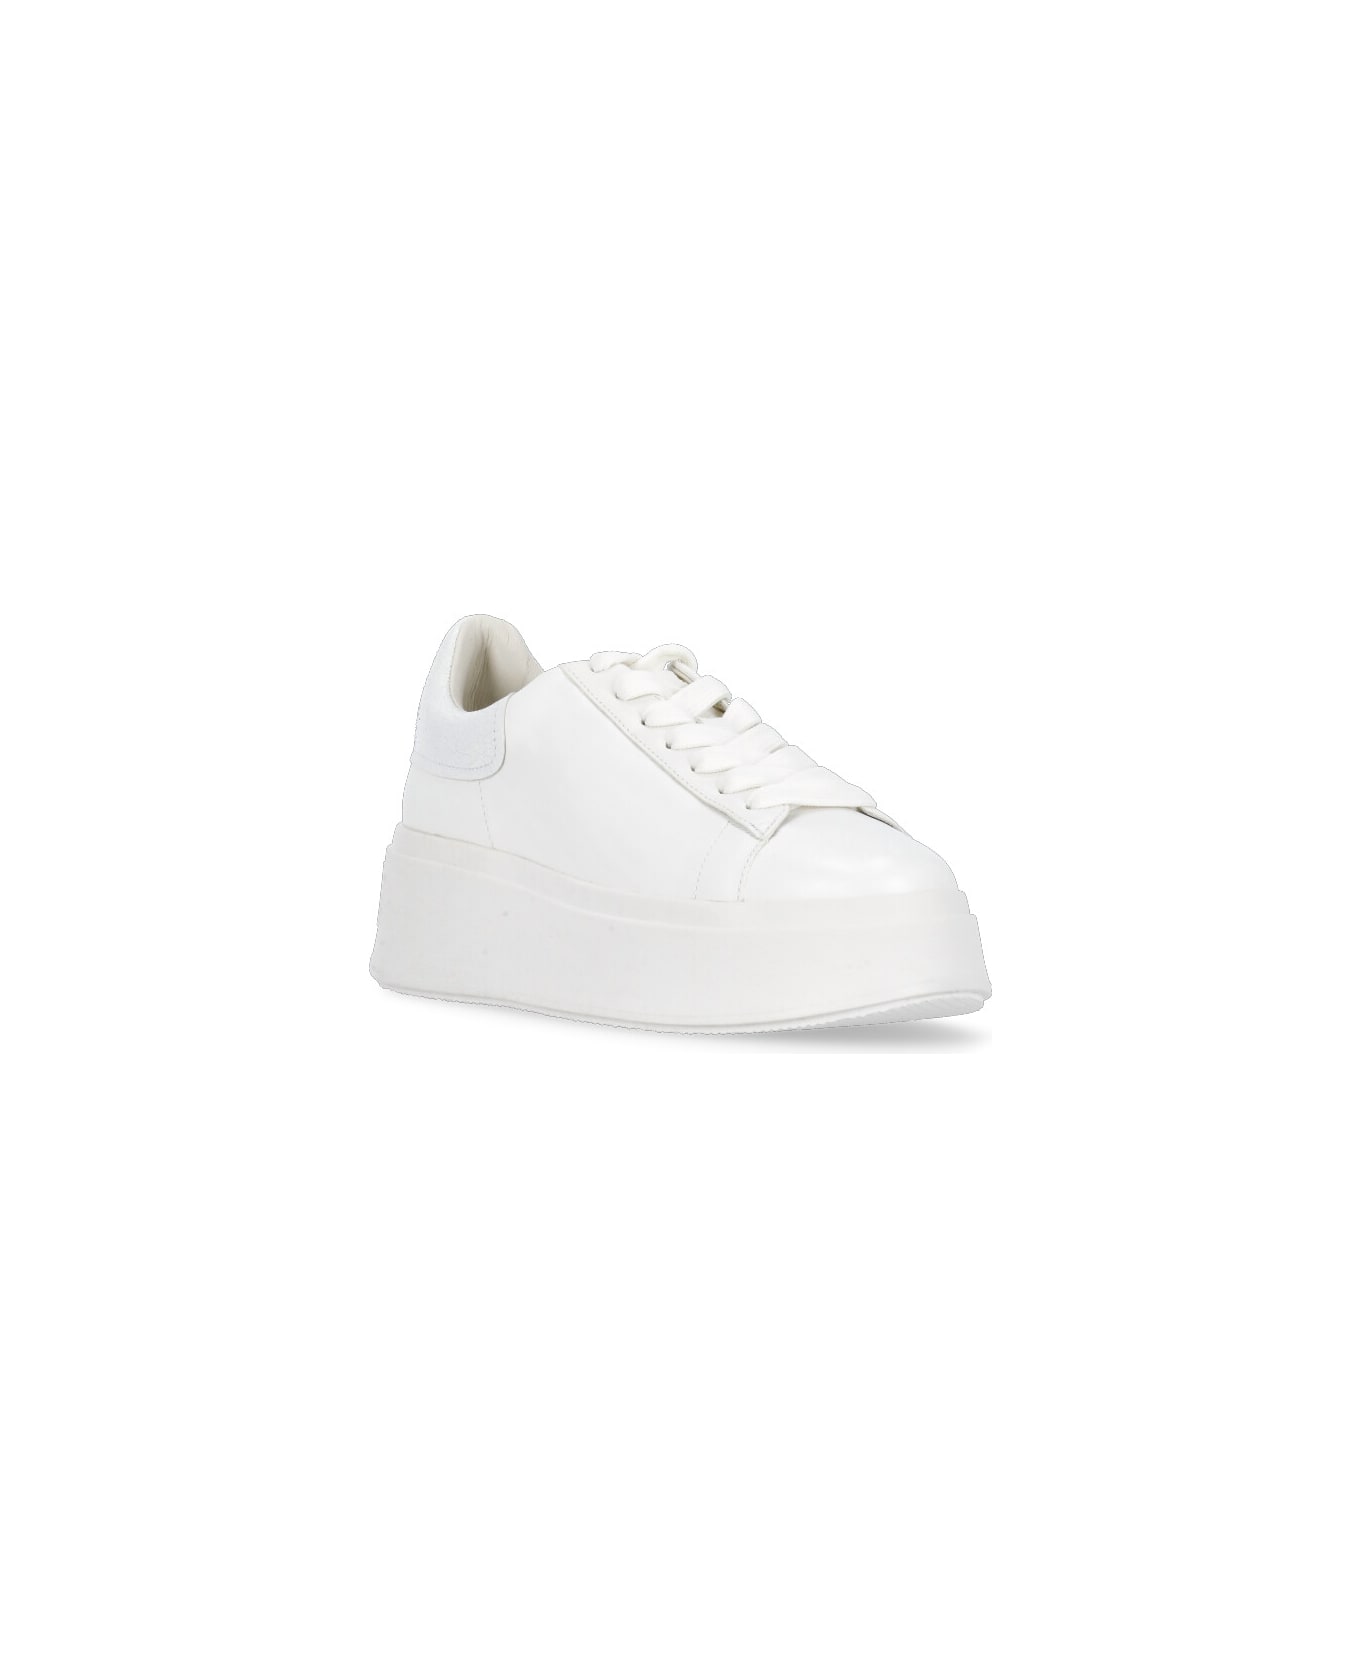 Ash Moby Be Kind Sneakers - White ウェッジシューズ